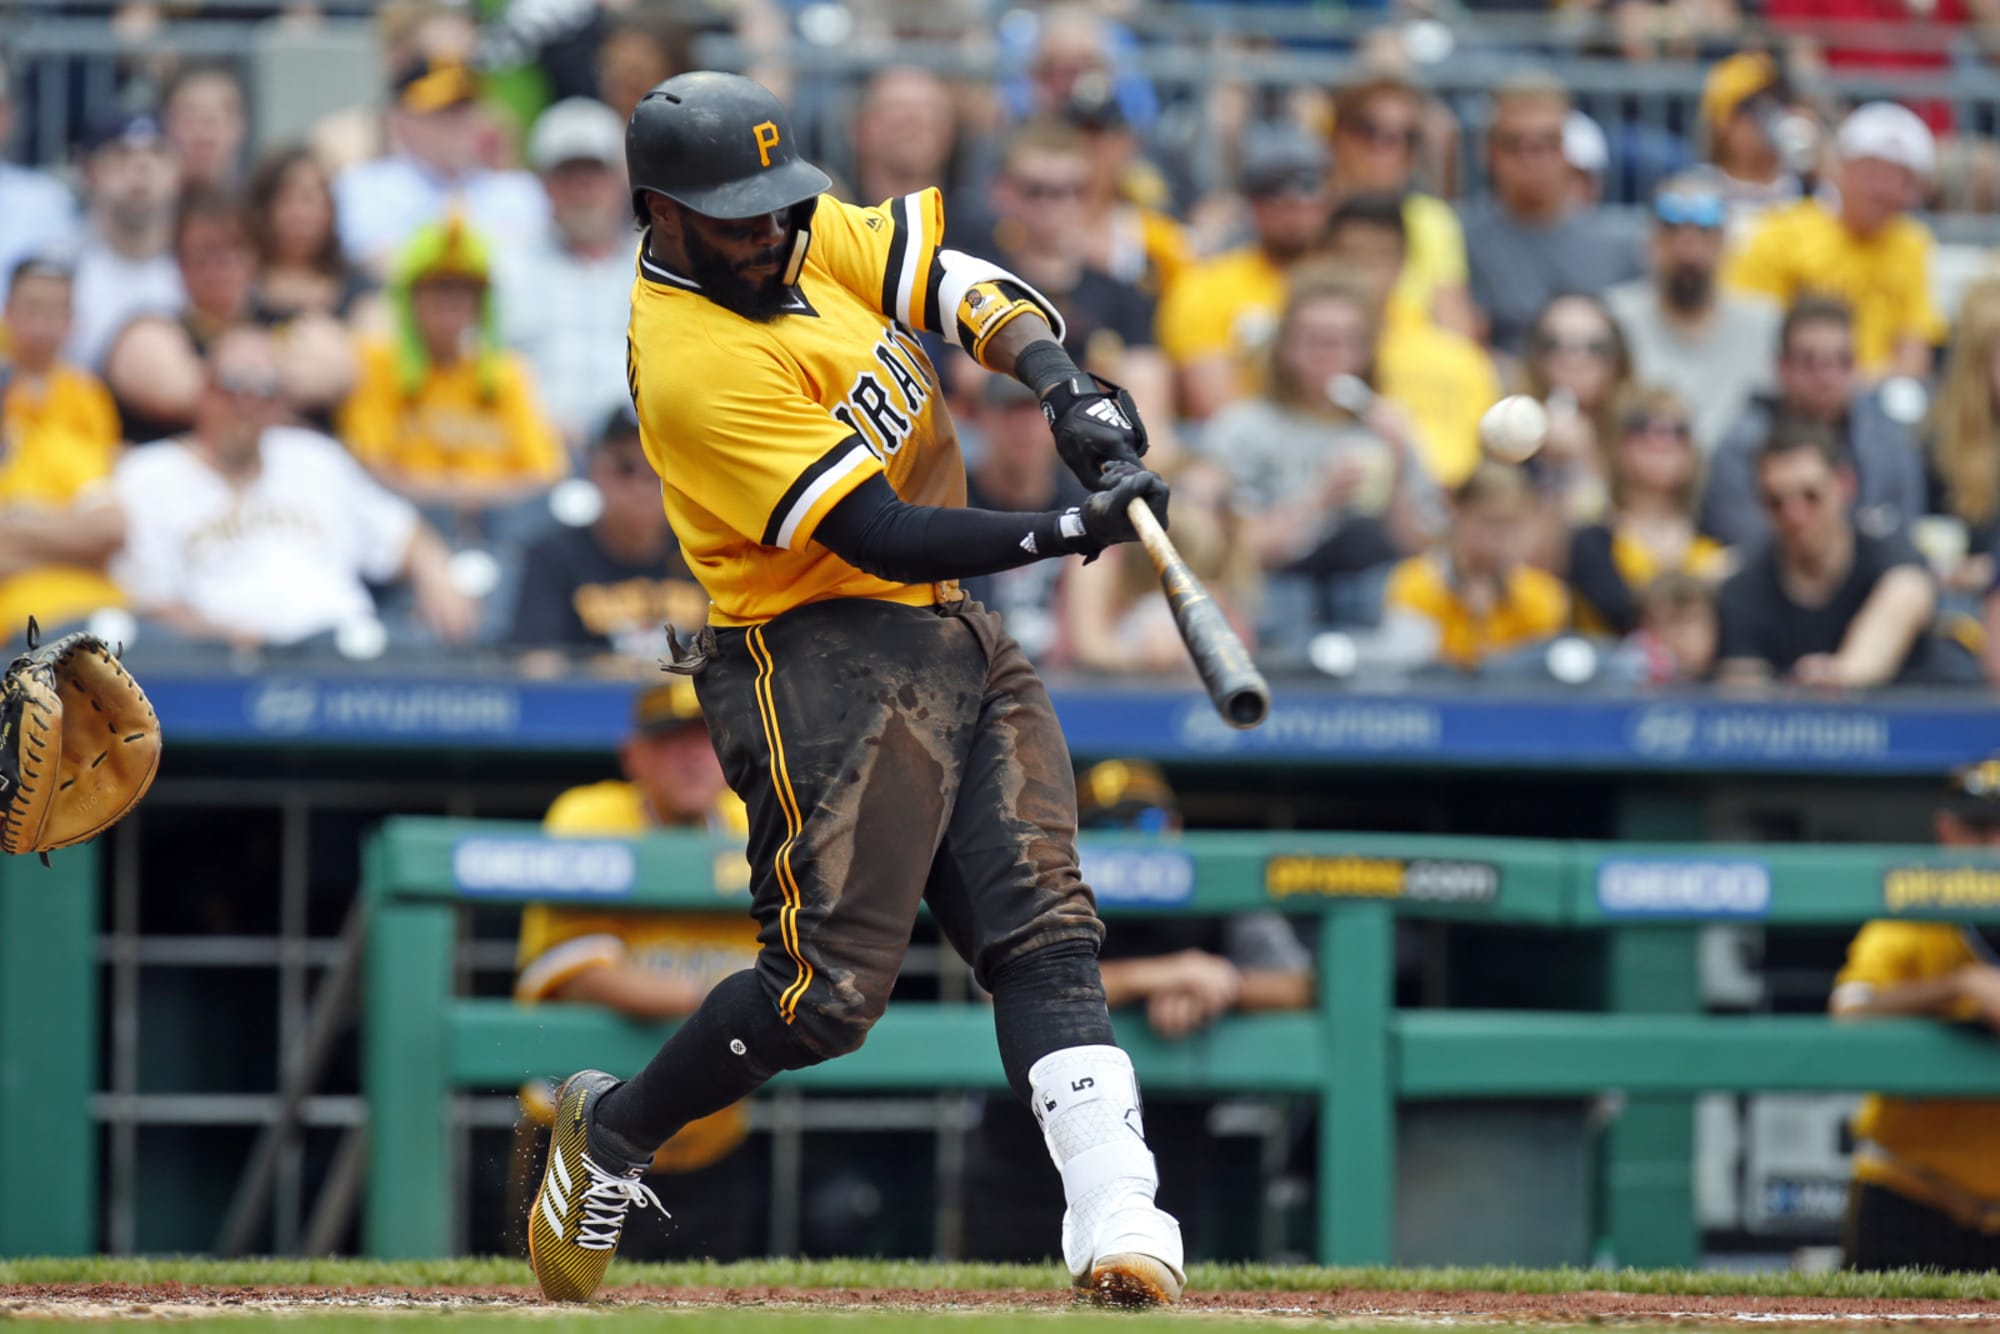 Pittsburgh Pirates Meltdown in the 9th Inning, Lose Series vs the Padres